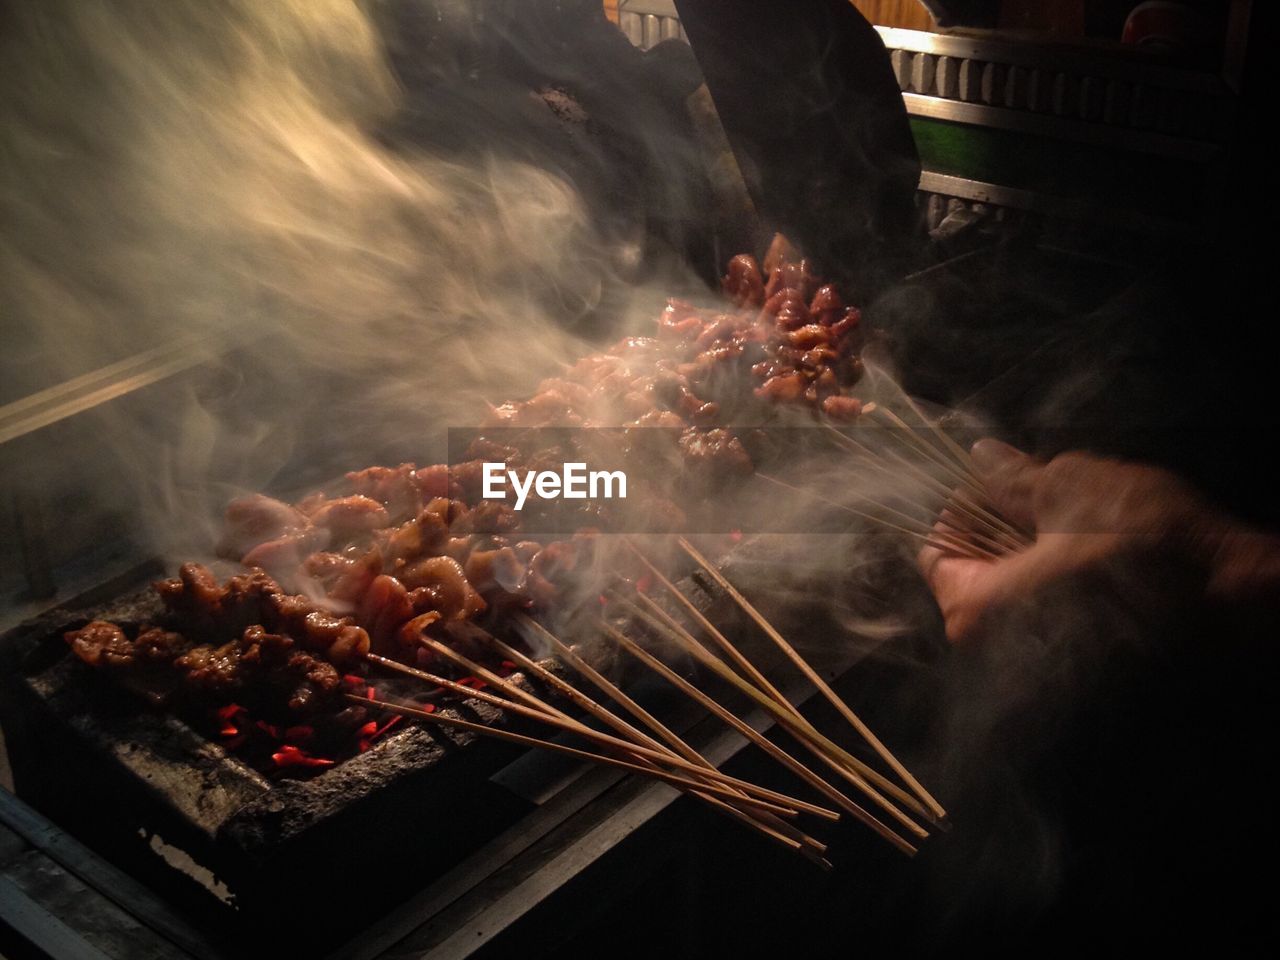 Cropped hand grilling chicken satay on barbecue grill